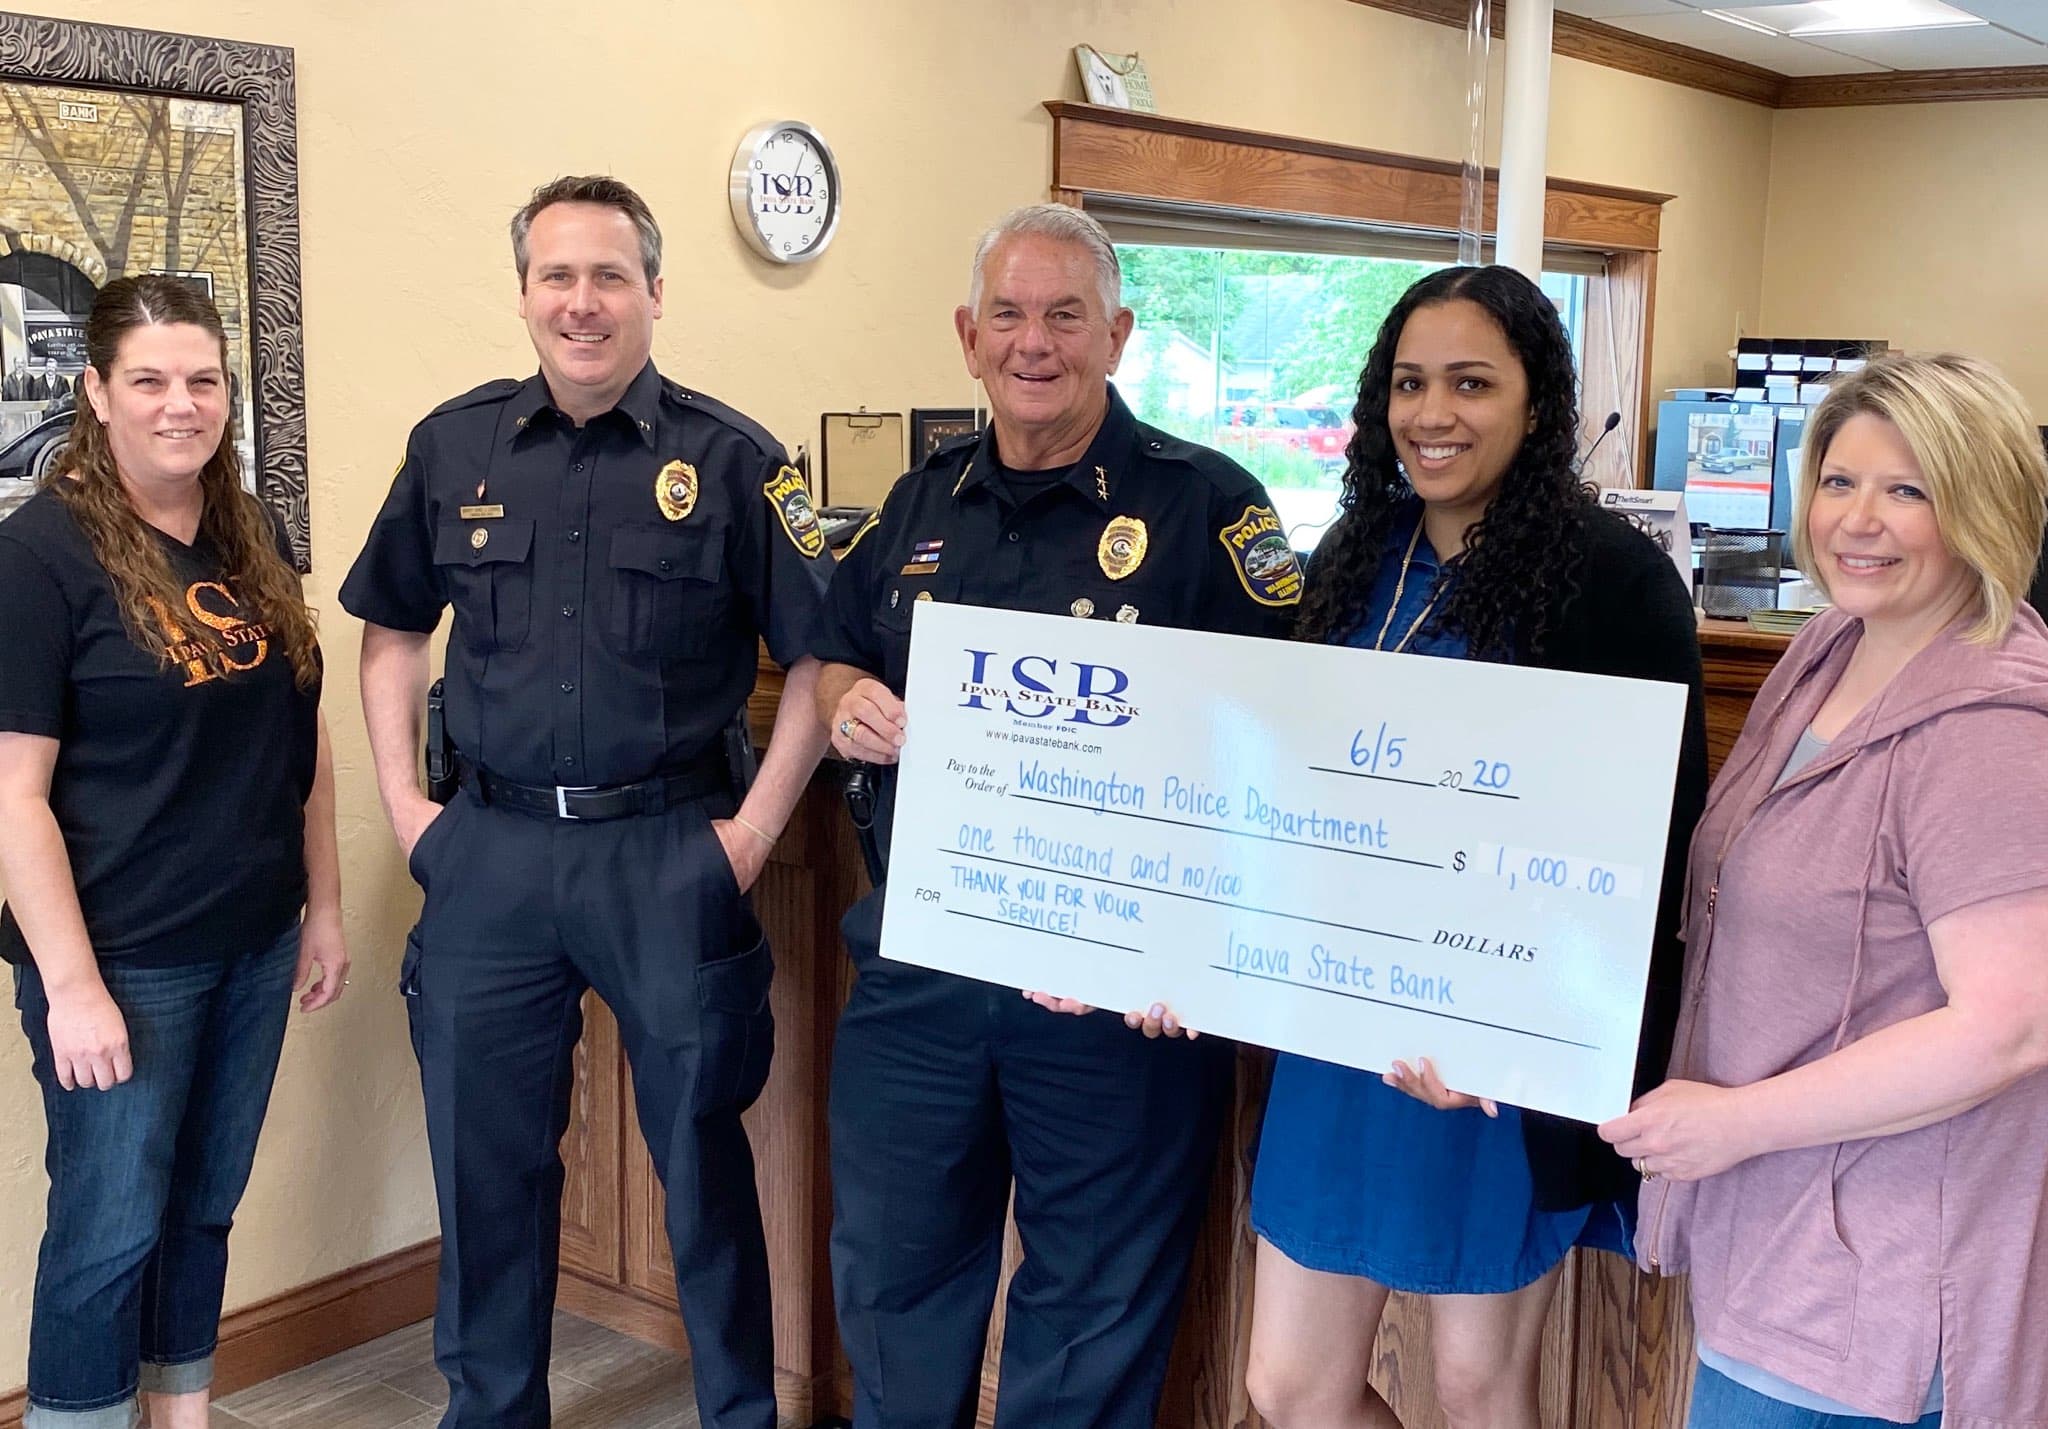 Ipava State Bank donating to police department